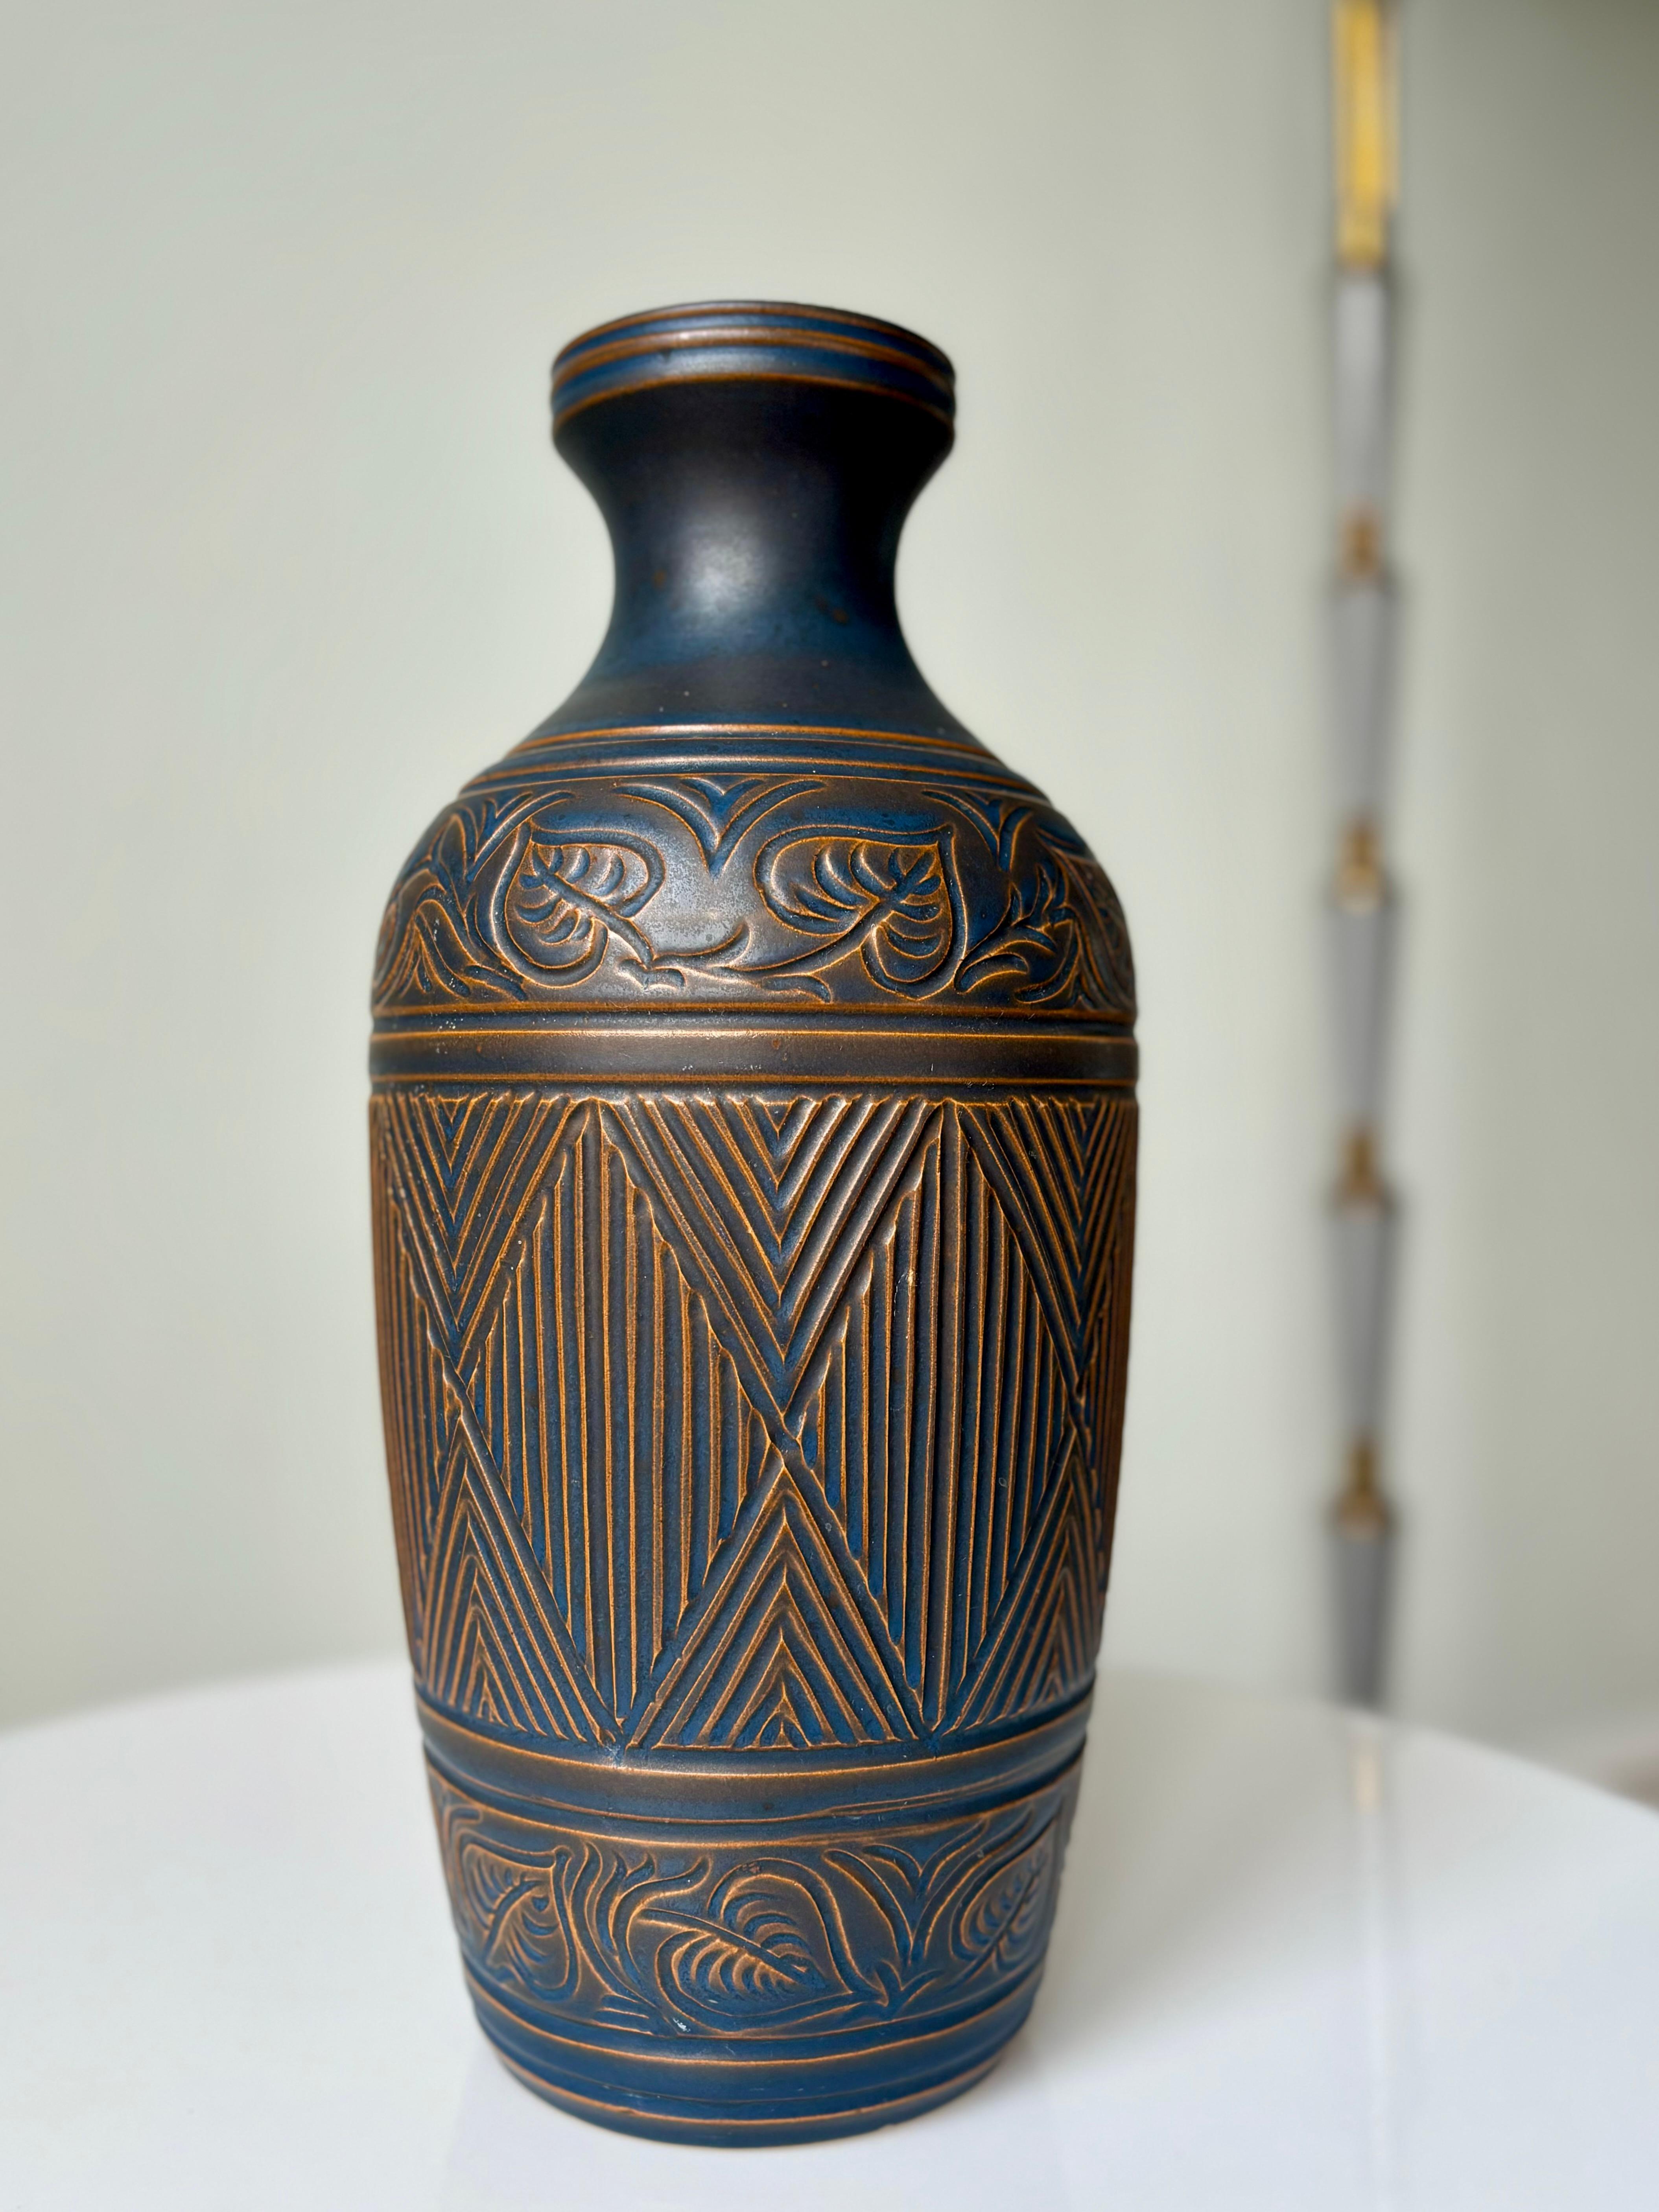 Tall Danish Art Deco style decorated ceramic vase by Bromølle Keramik in 1962. Hand-thrown and hand-carved intricate lined and floral motifs. Caramel brown and dusty dark blue semi-matte glaze. Signed and dated under base. Beautiful vintage